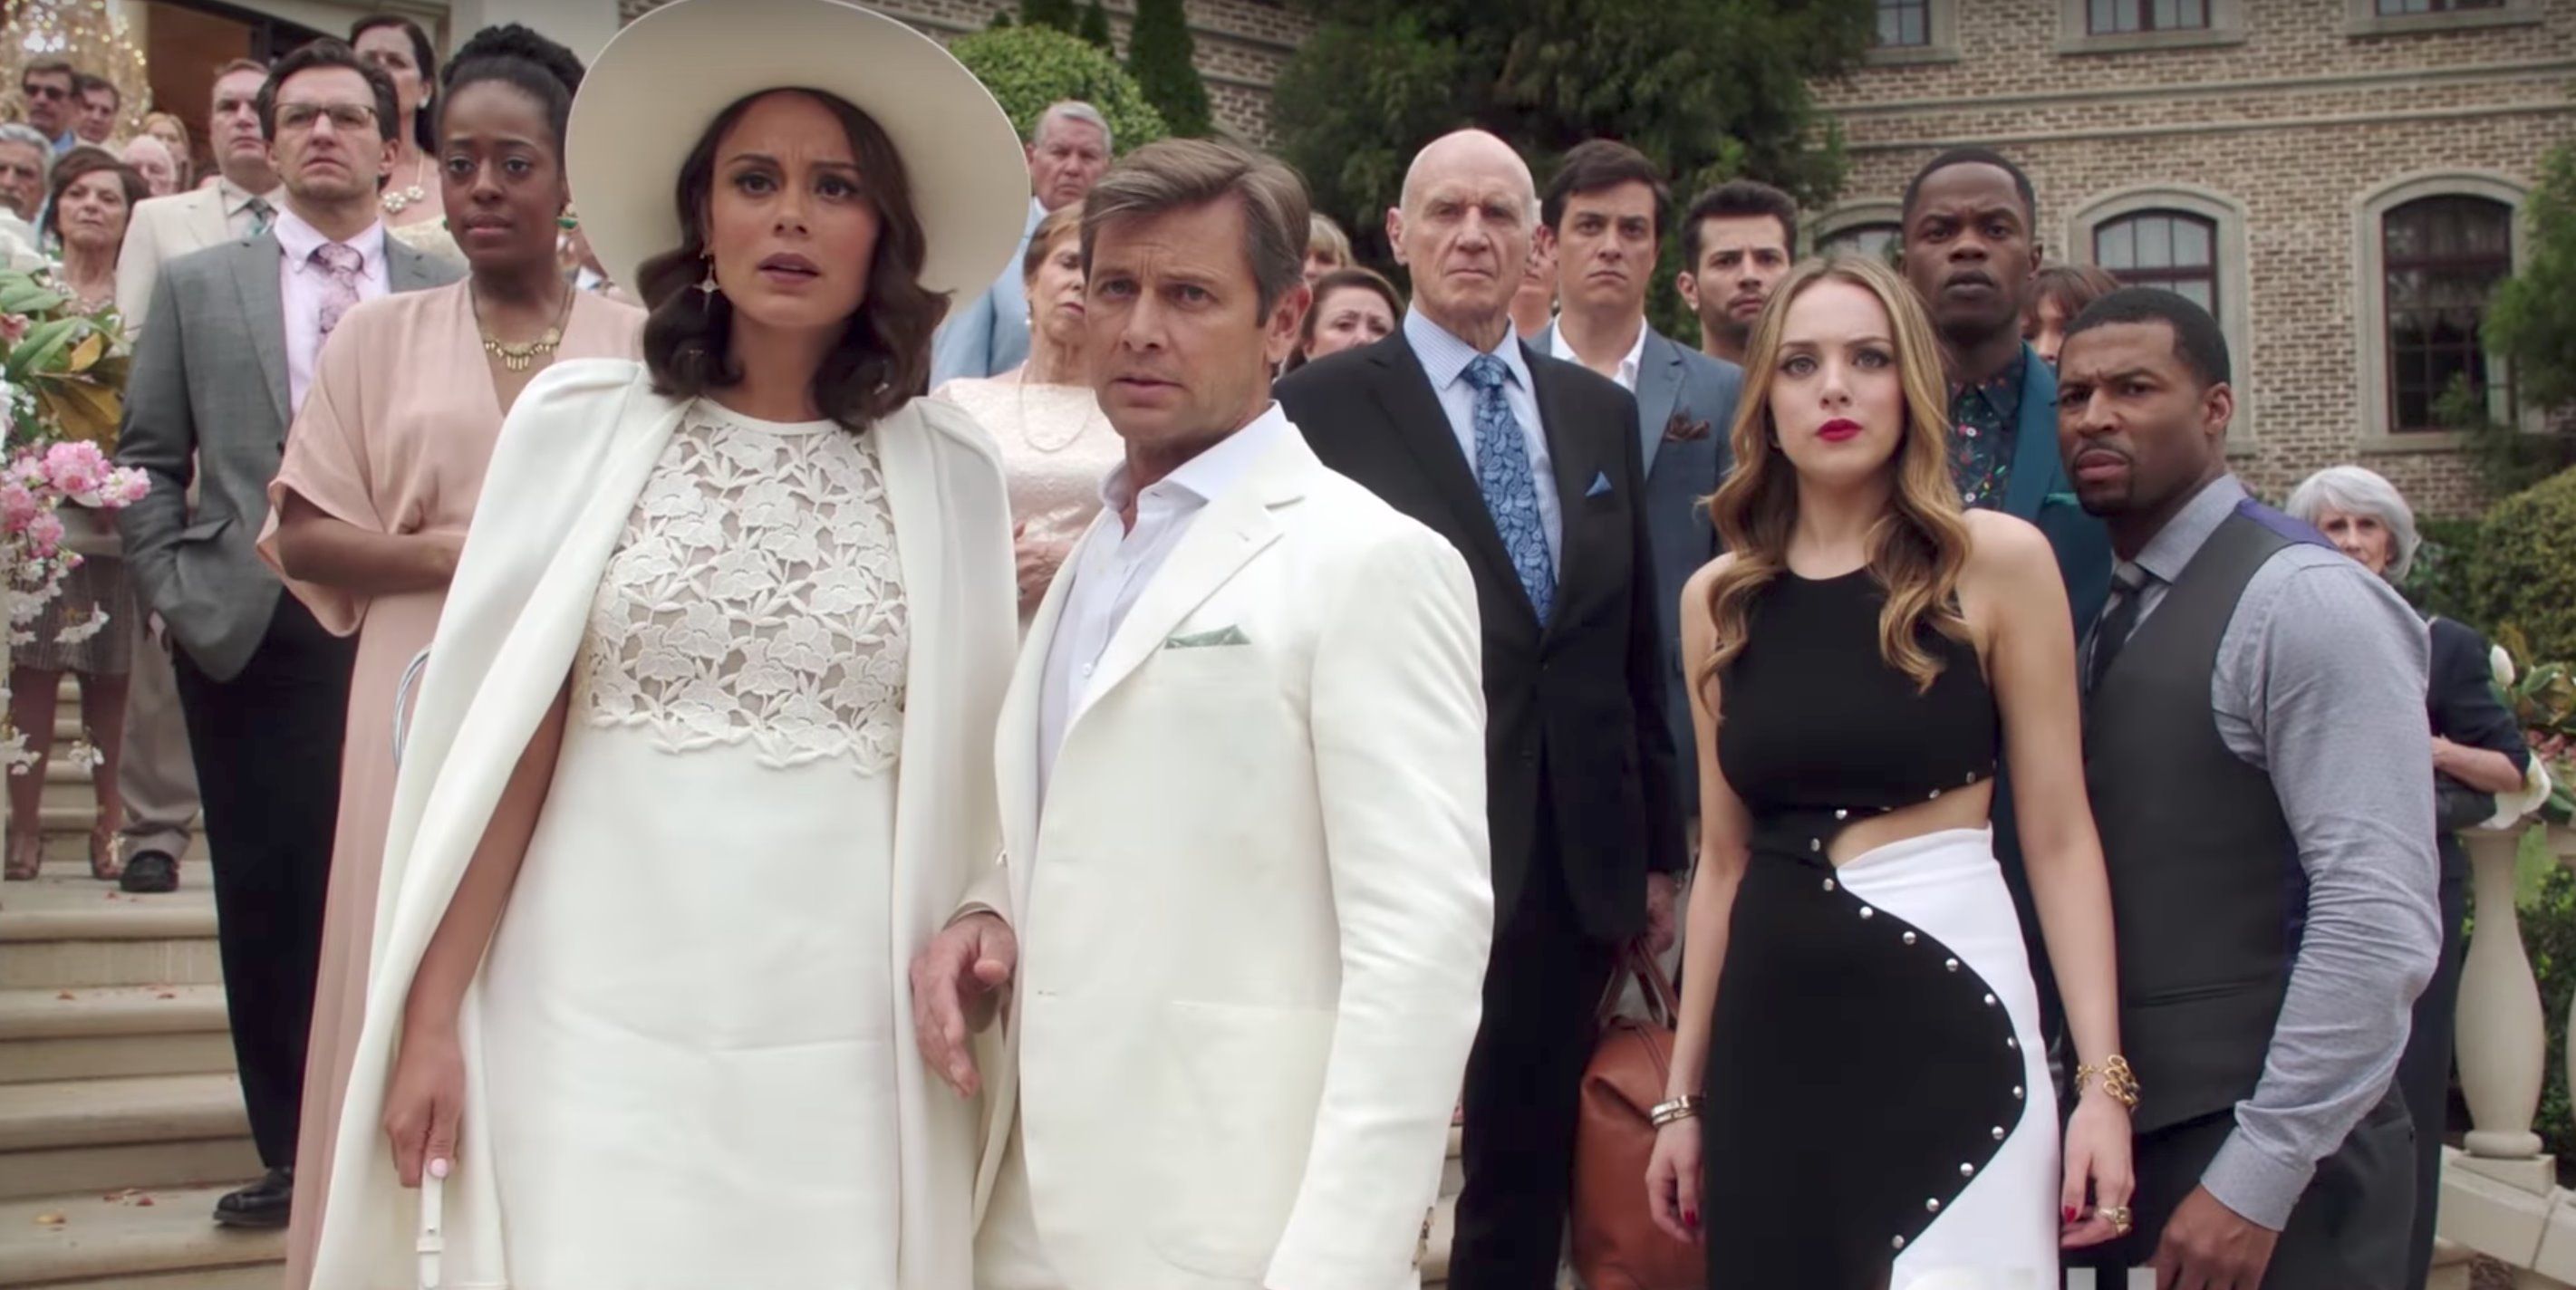 Dynasty: 5 Things That The Reboot Does Better Than The Original (& 5 Vice Versa)